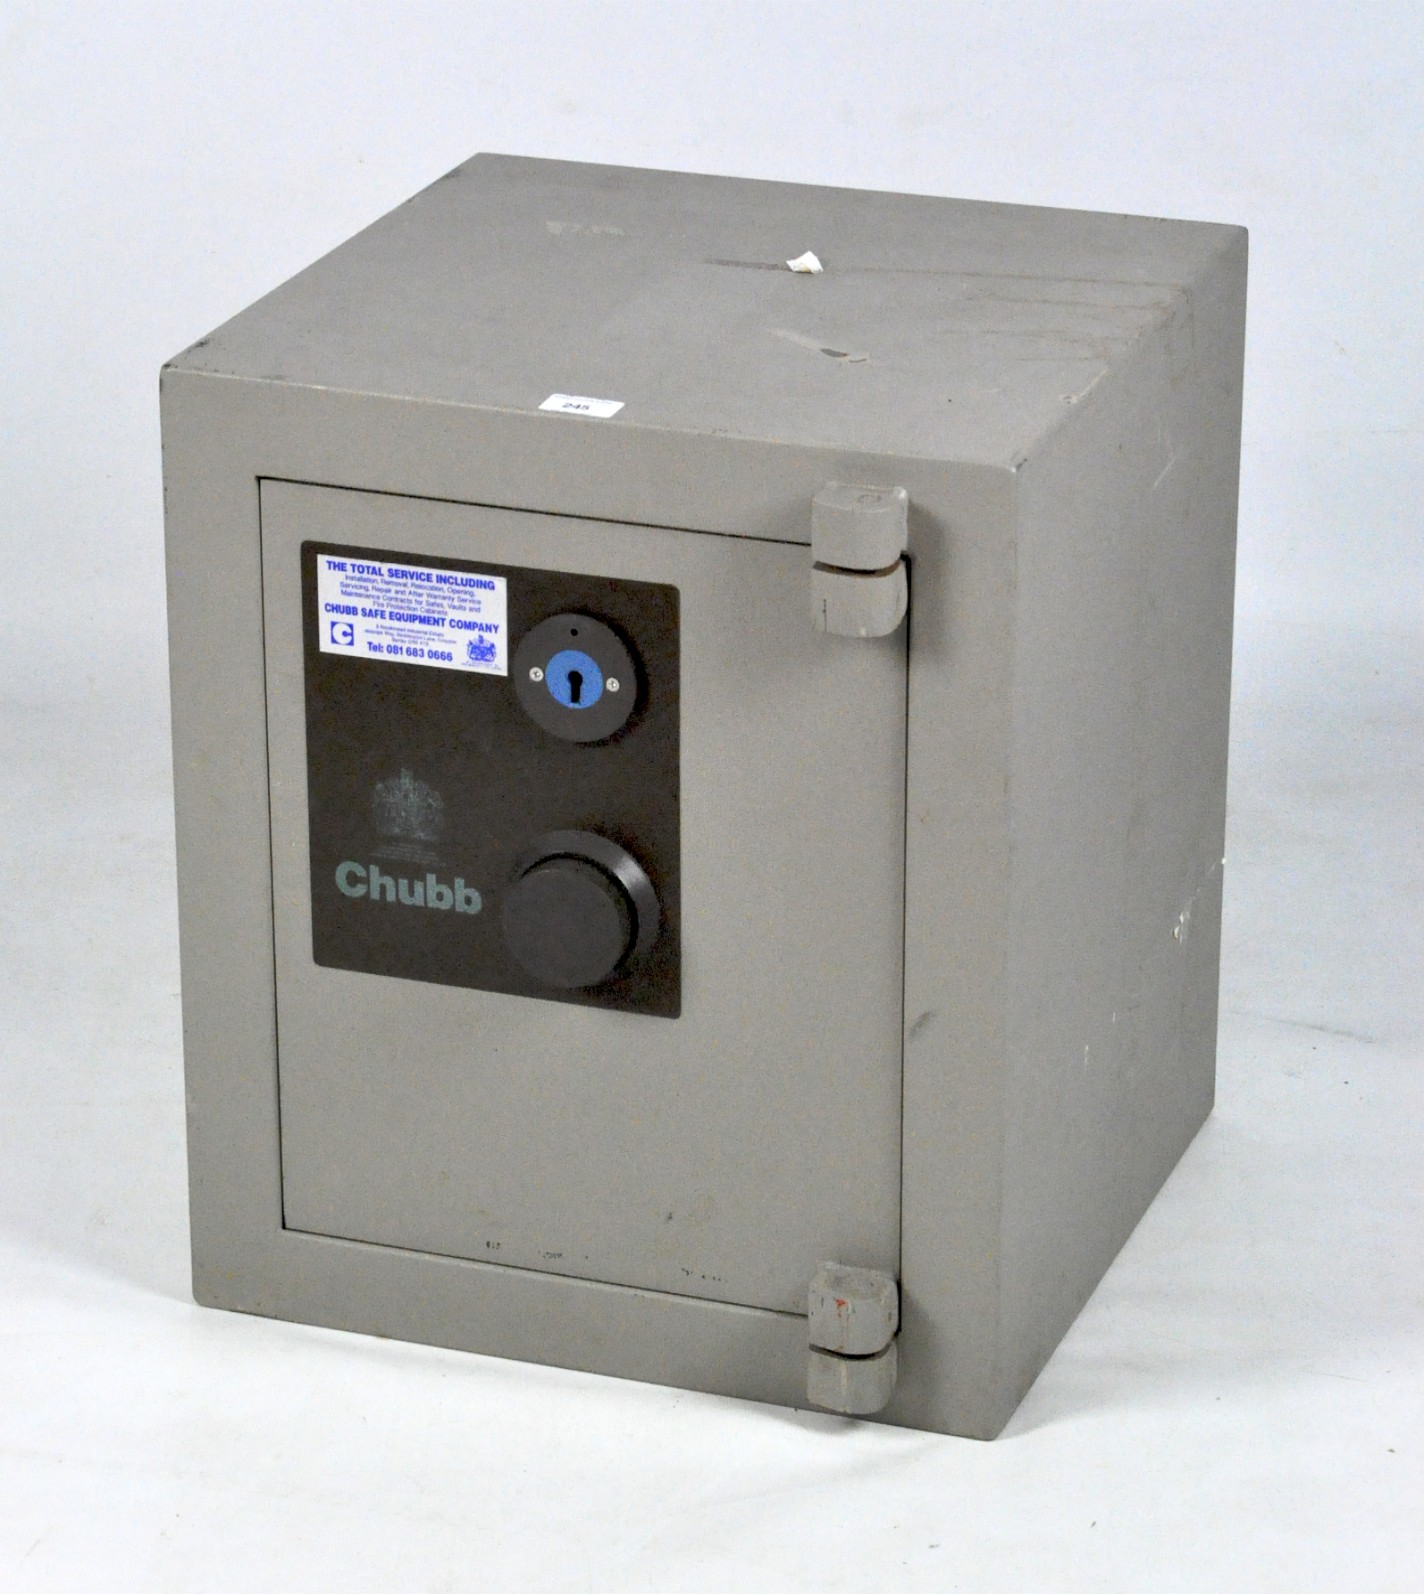 A Chubb personal safe,